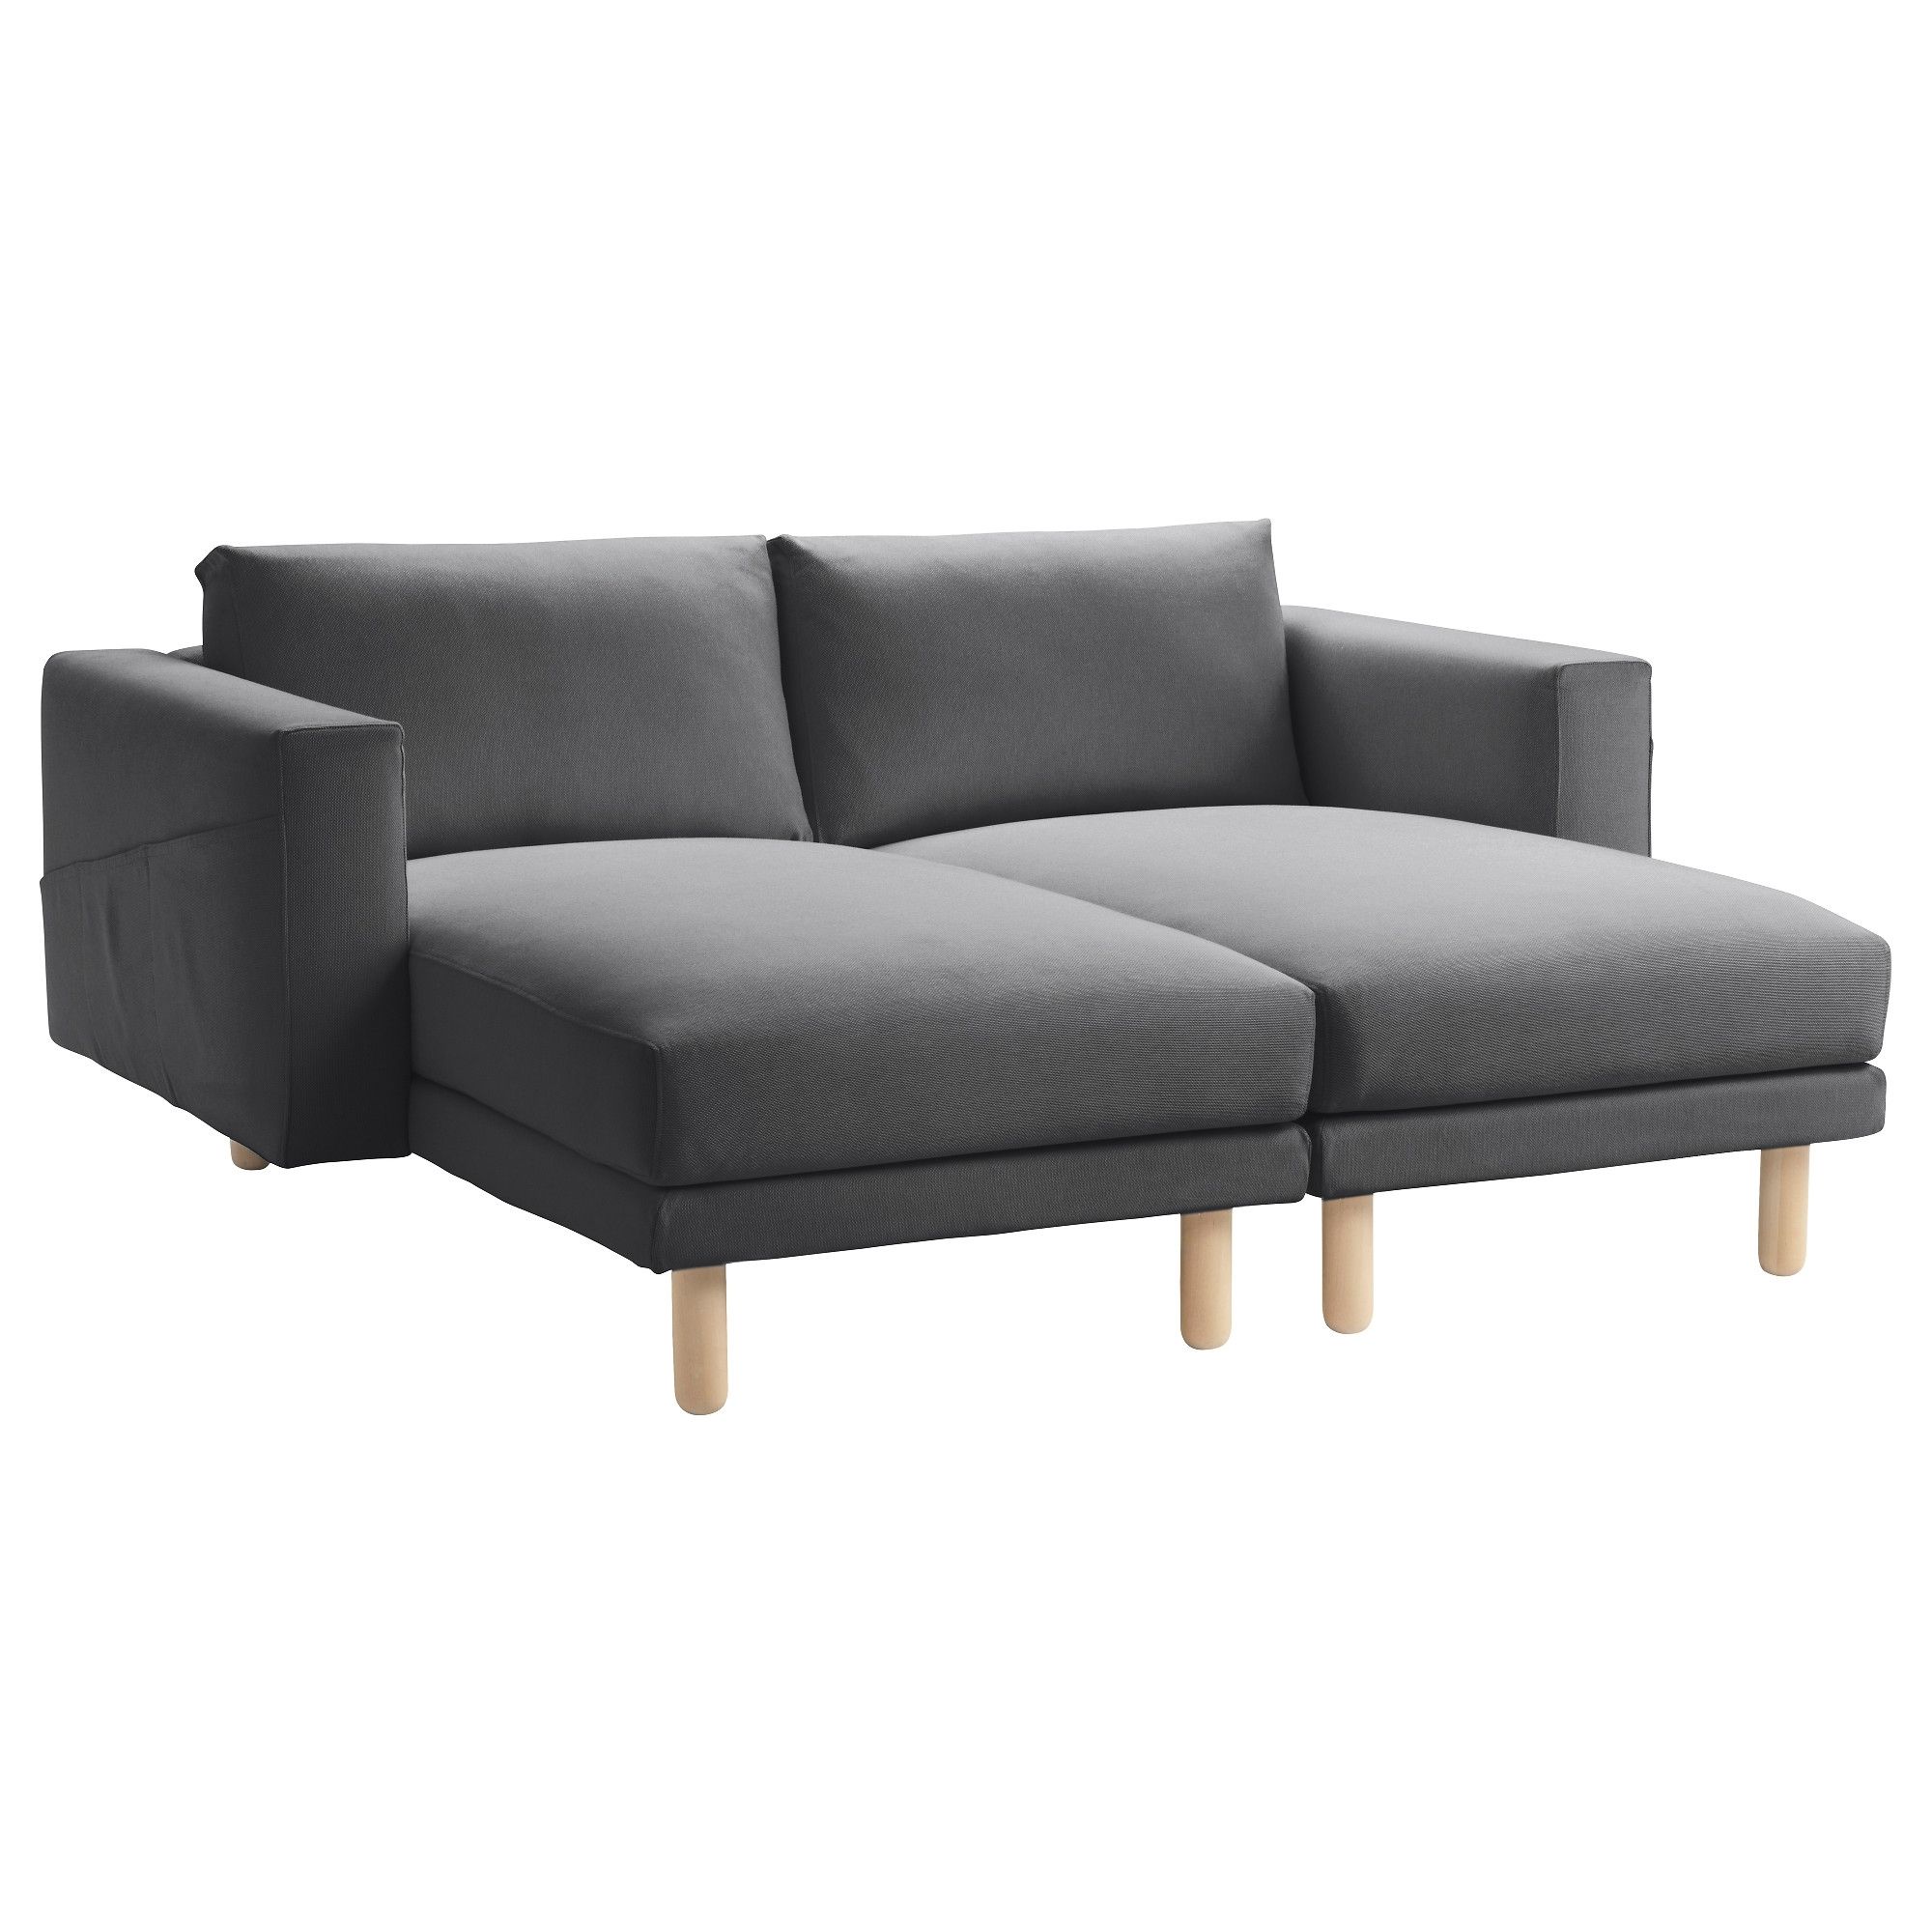 Norsborg Sectional, 2 Seat – Finnsta Dark Gray – Ikea In Well Liked Ikea Chaise Lounge Chairs (View 6 of 15)